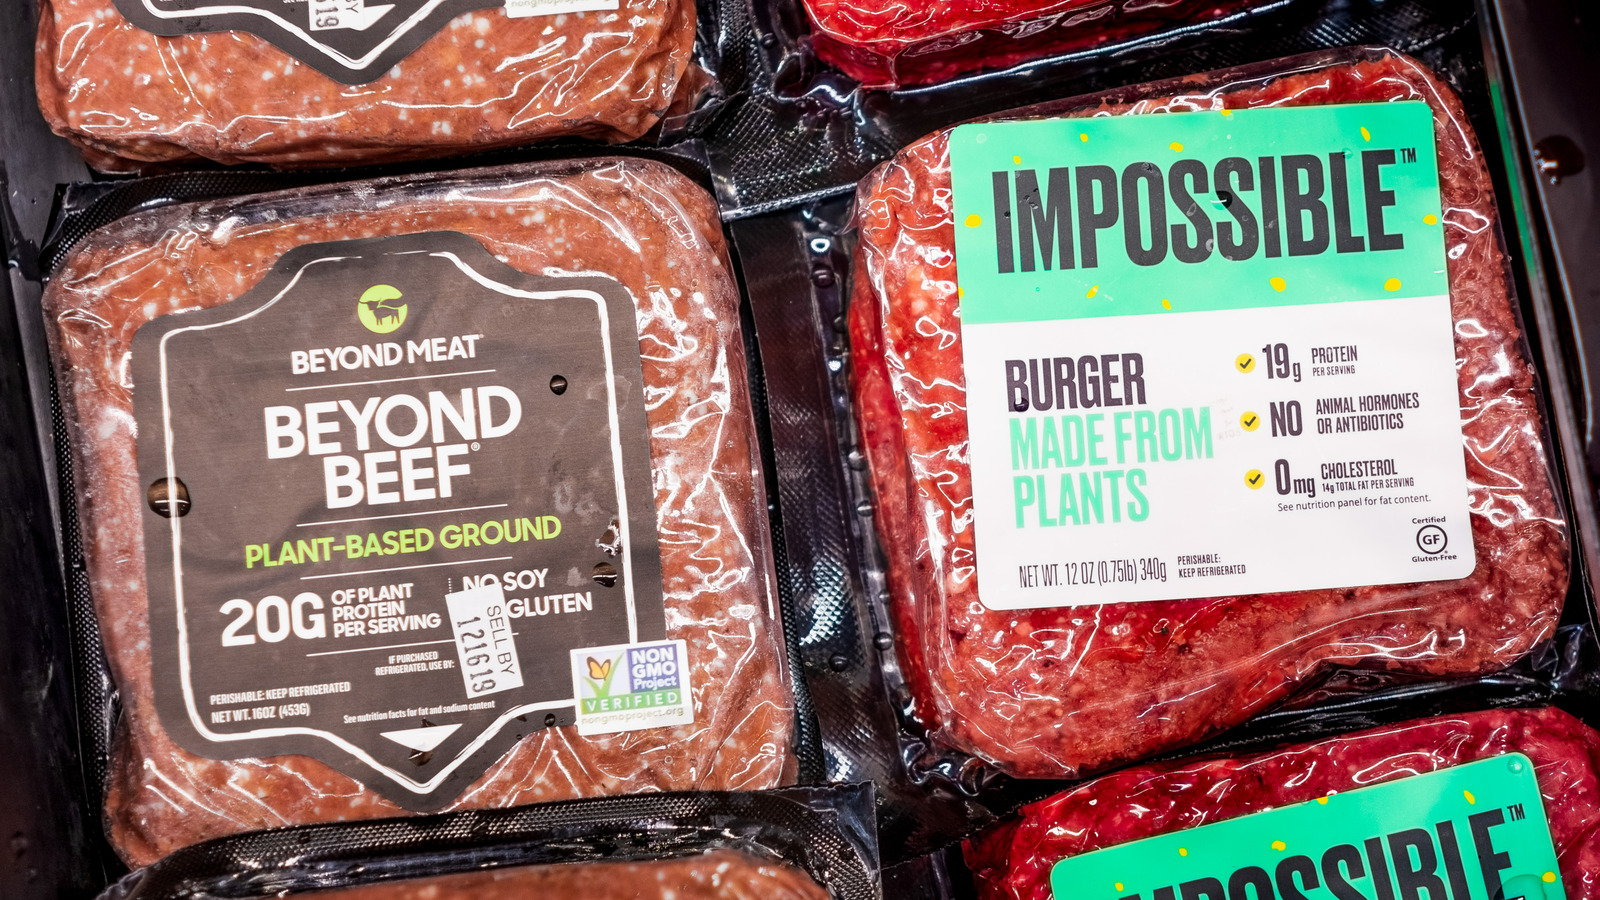 What Are The Differences Between Beyond Meat And Impossible Burger?